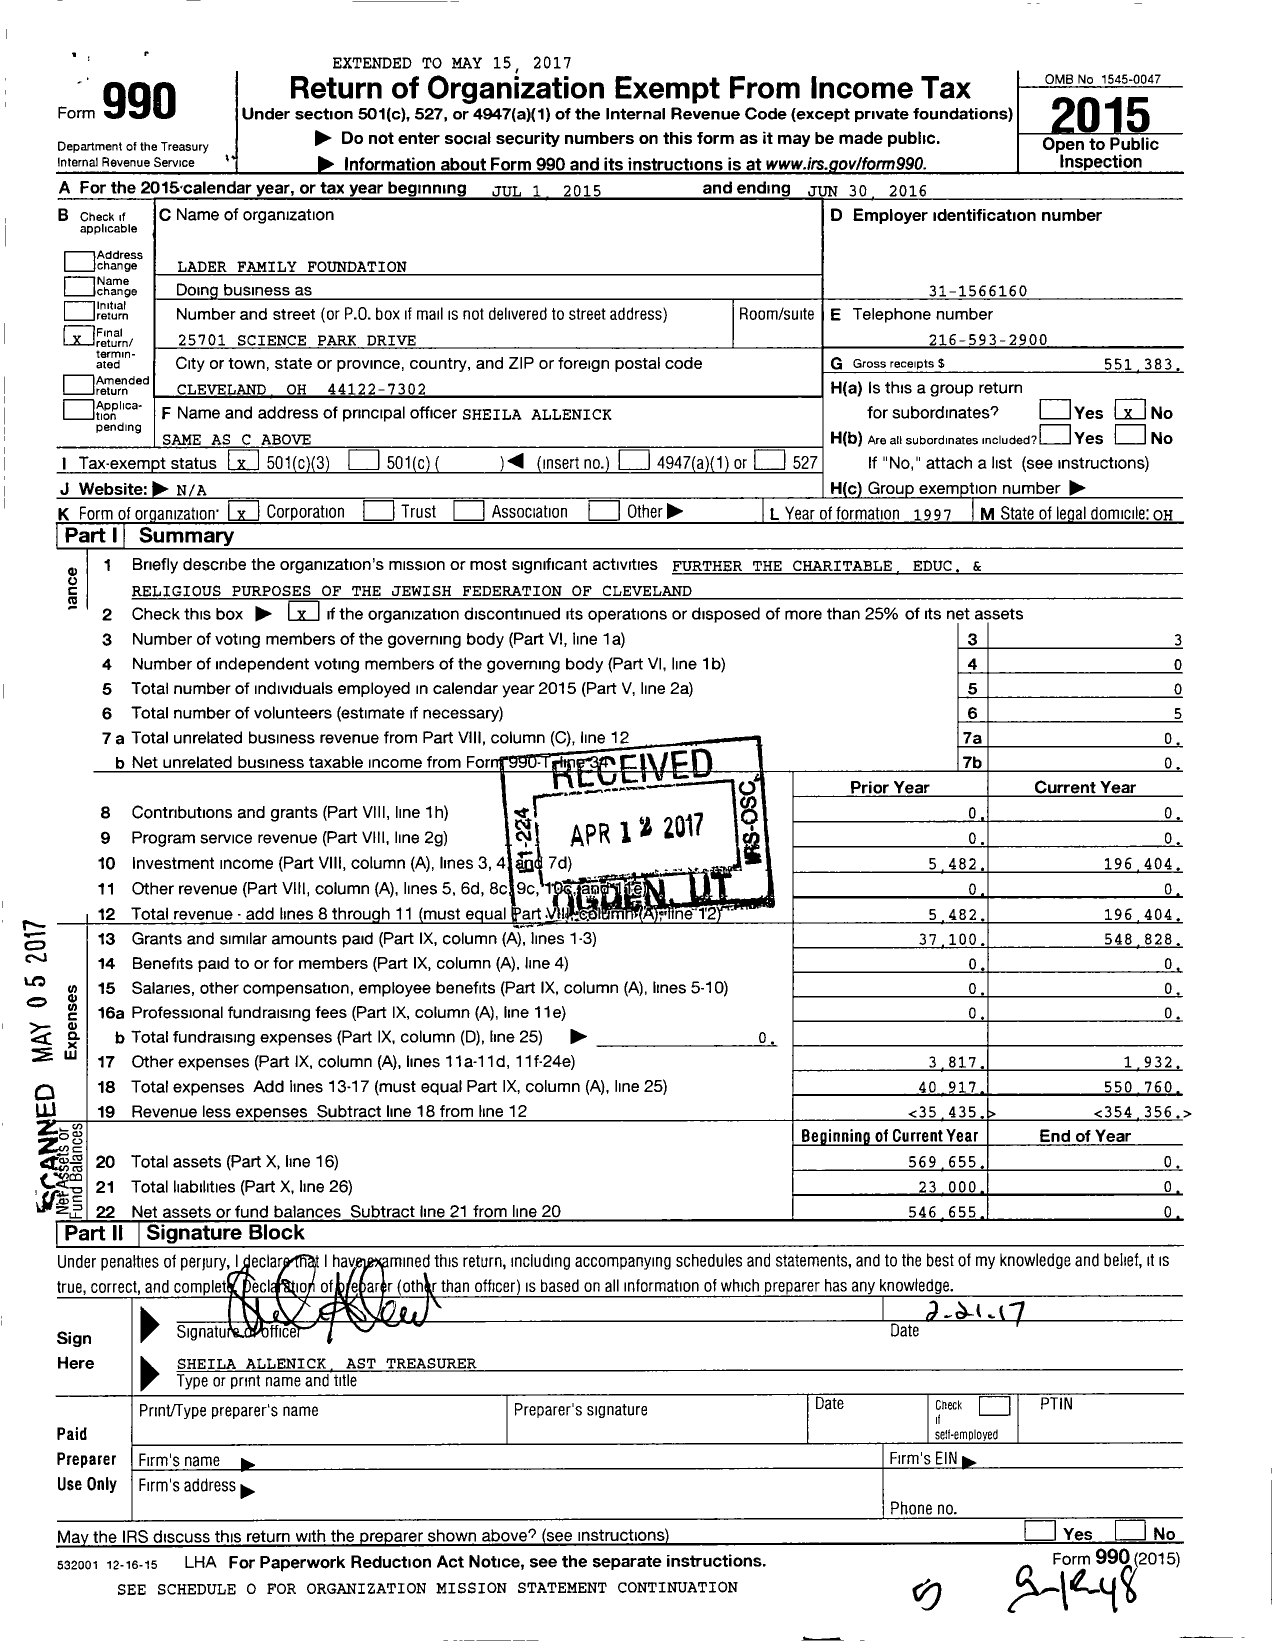 Image of first page of 2015 Form 990 for Lader Family Foundation